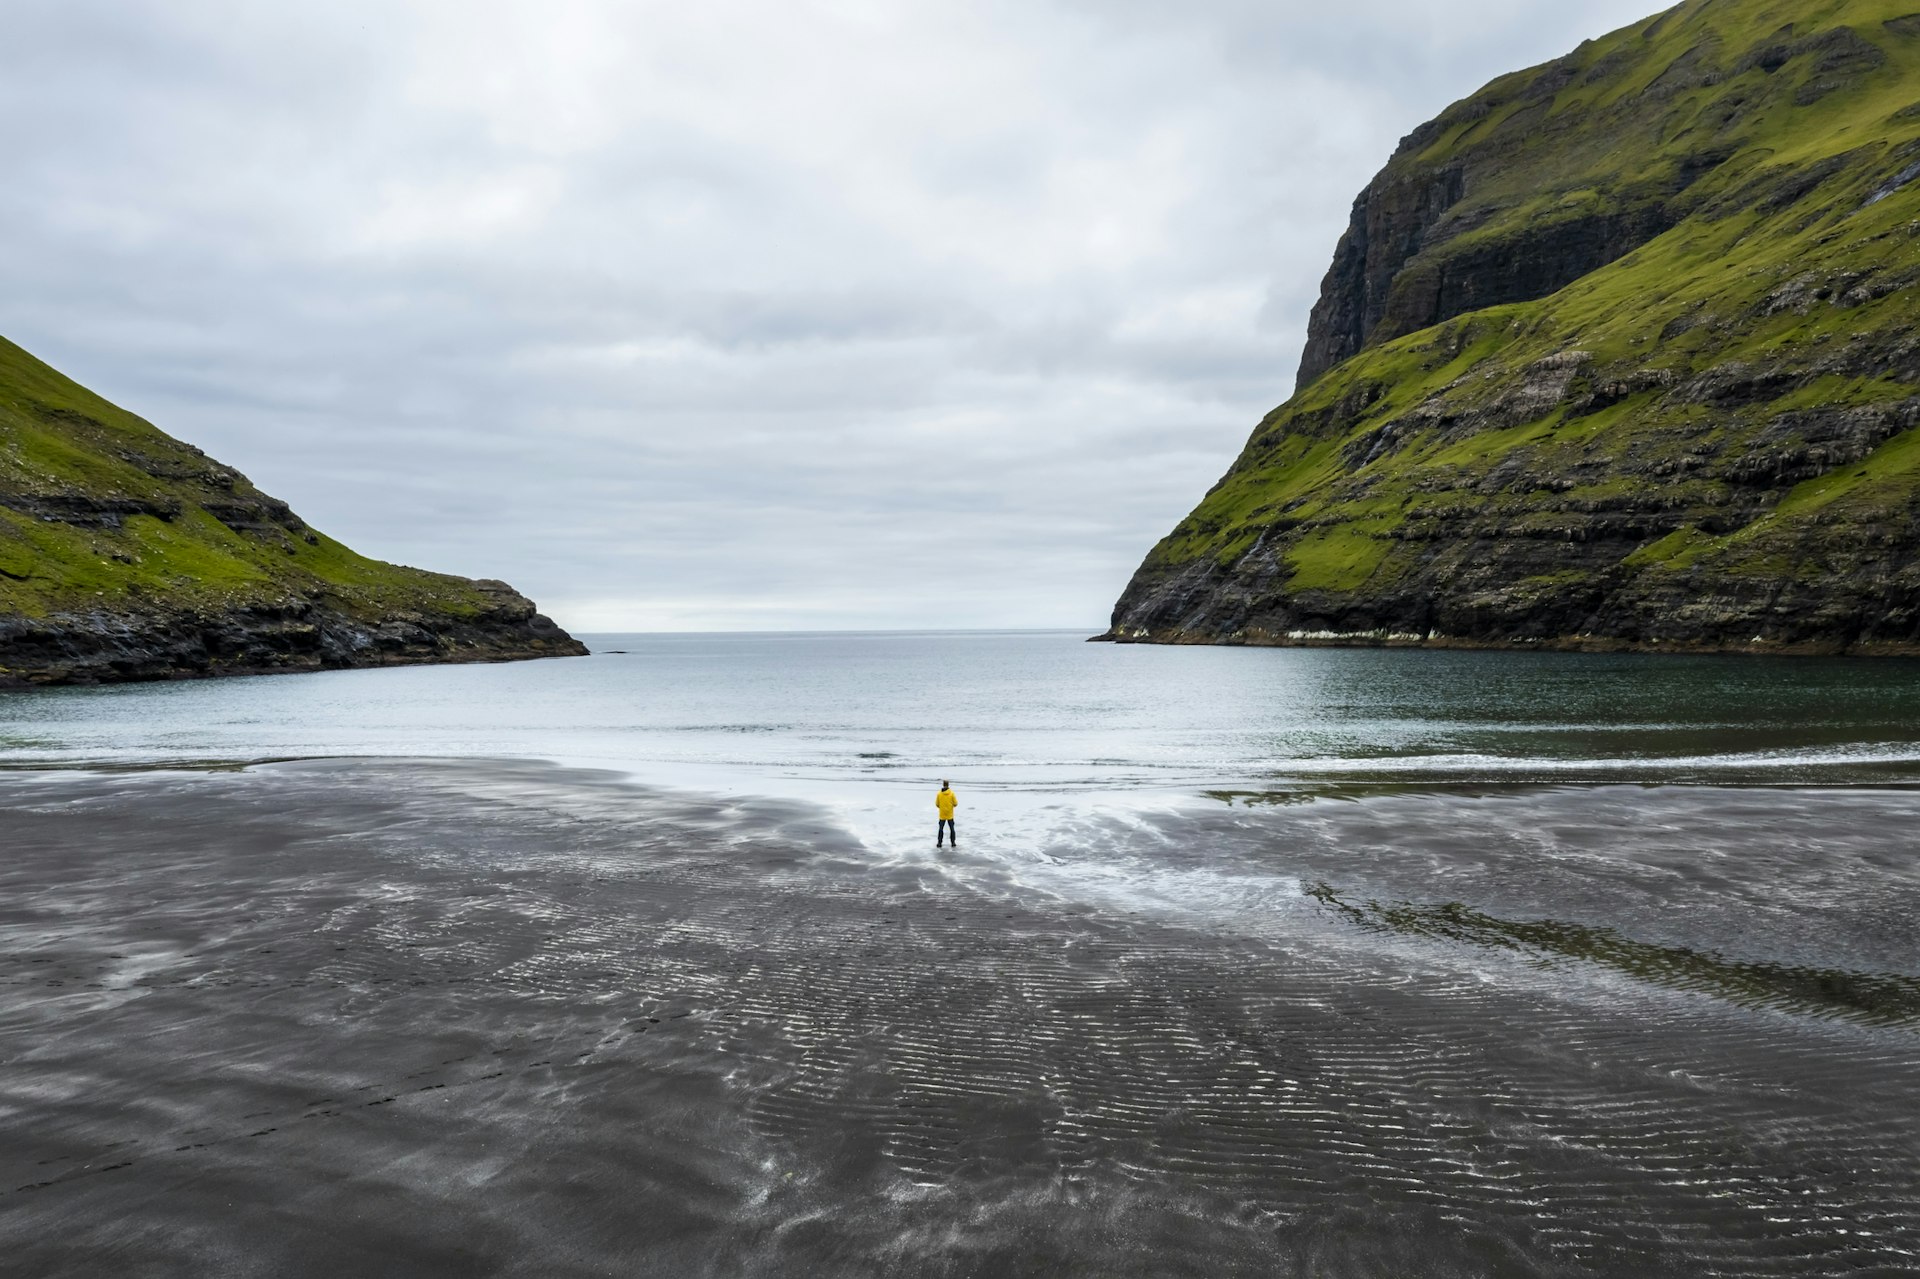 A solo figure stands on a wide windswept beach as rainy weather closes in